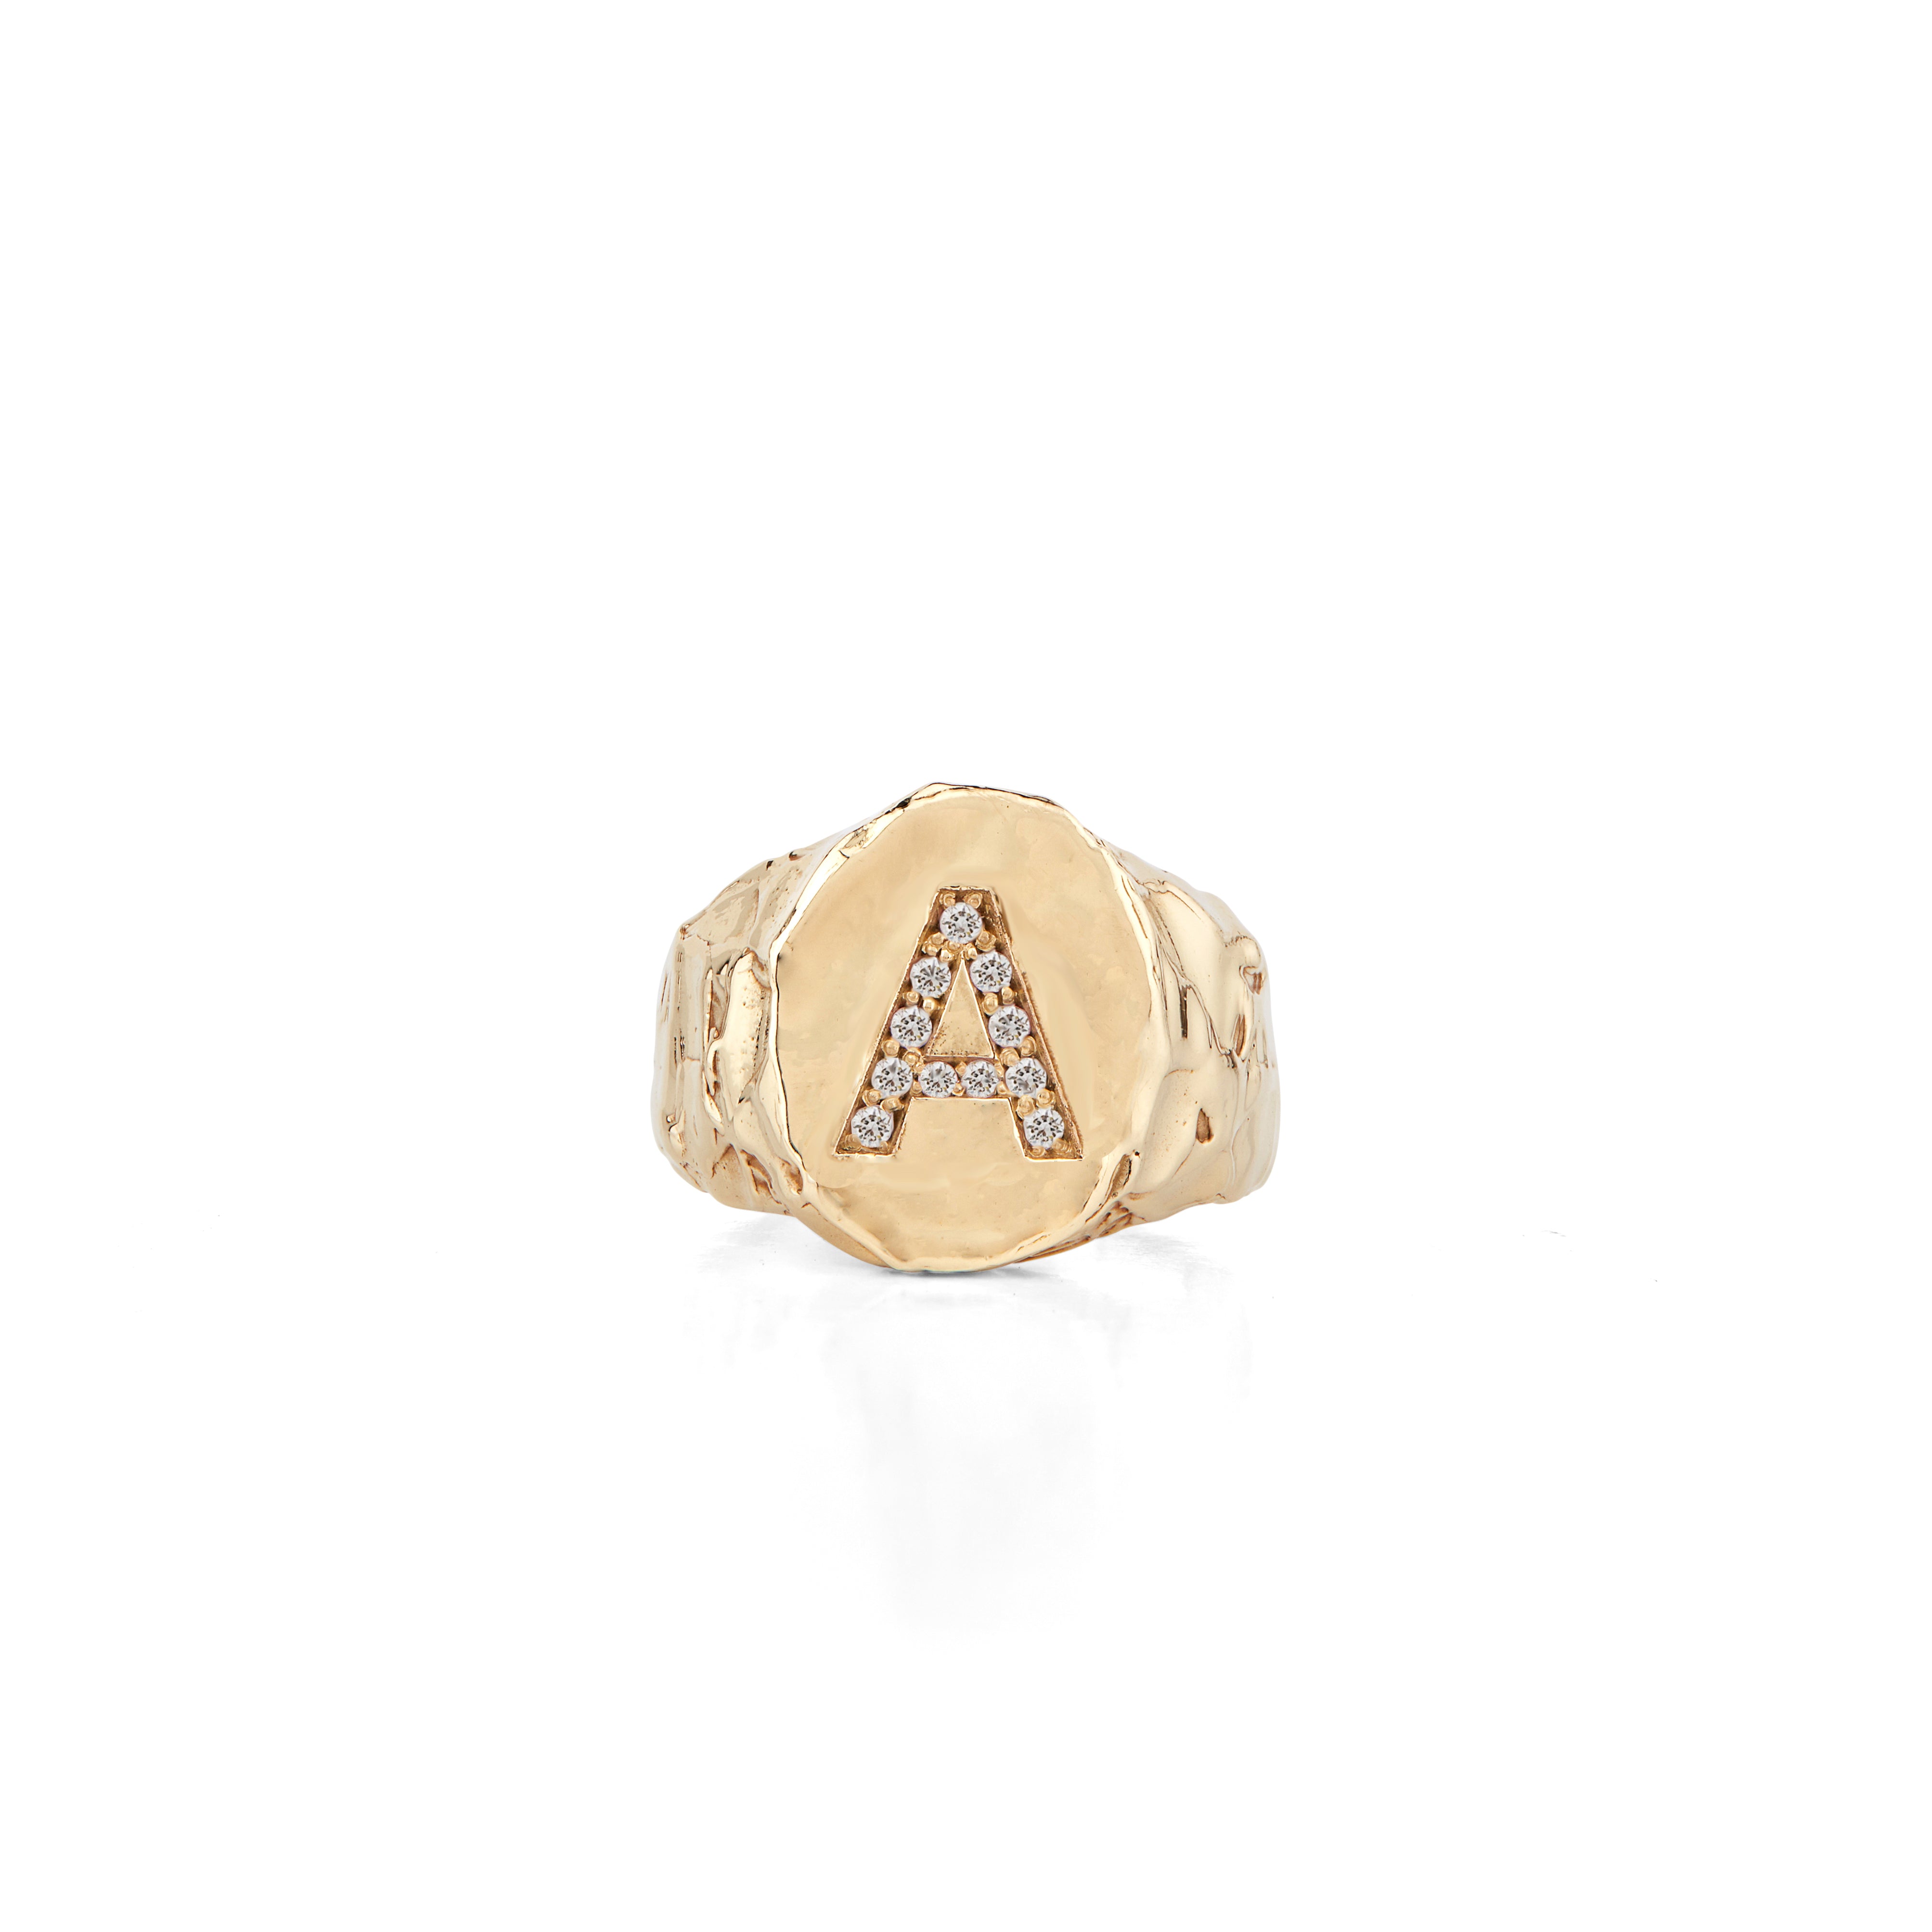  Monogram Signet Ring, Bold Chunky Personalized Letter